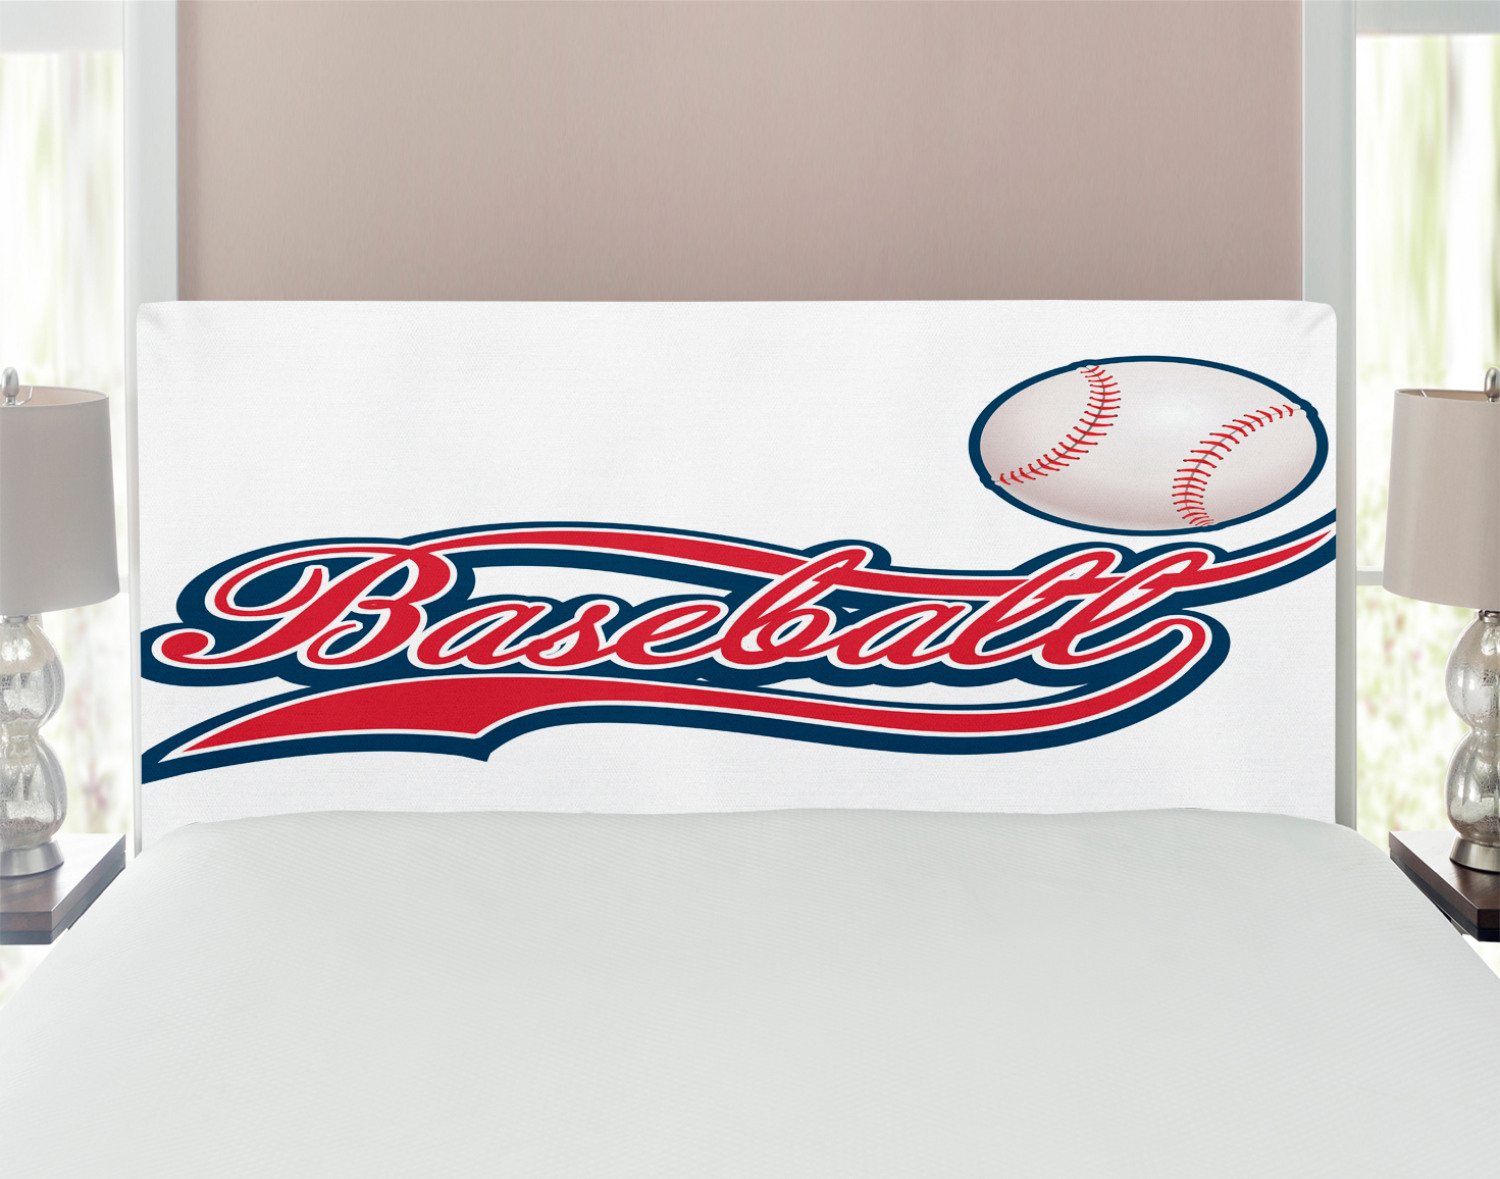 Sports Headboard, Baseball Ball Sporting Pastime National Sport Athleticism Entertainment, Upholstered Decorative Metal Bed Headboard with Memory Foam, Full Size, Night Blue Red White, by Ambesonne - image 1 of 4